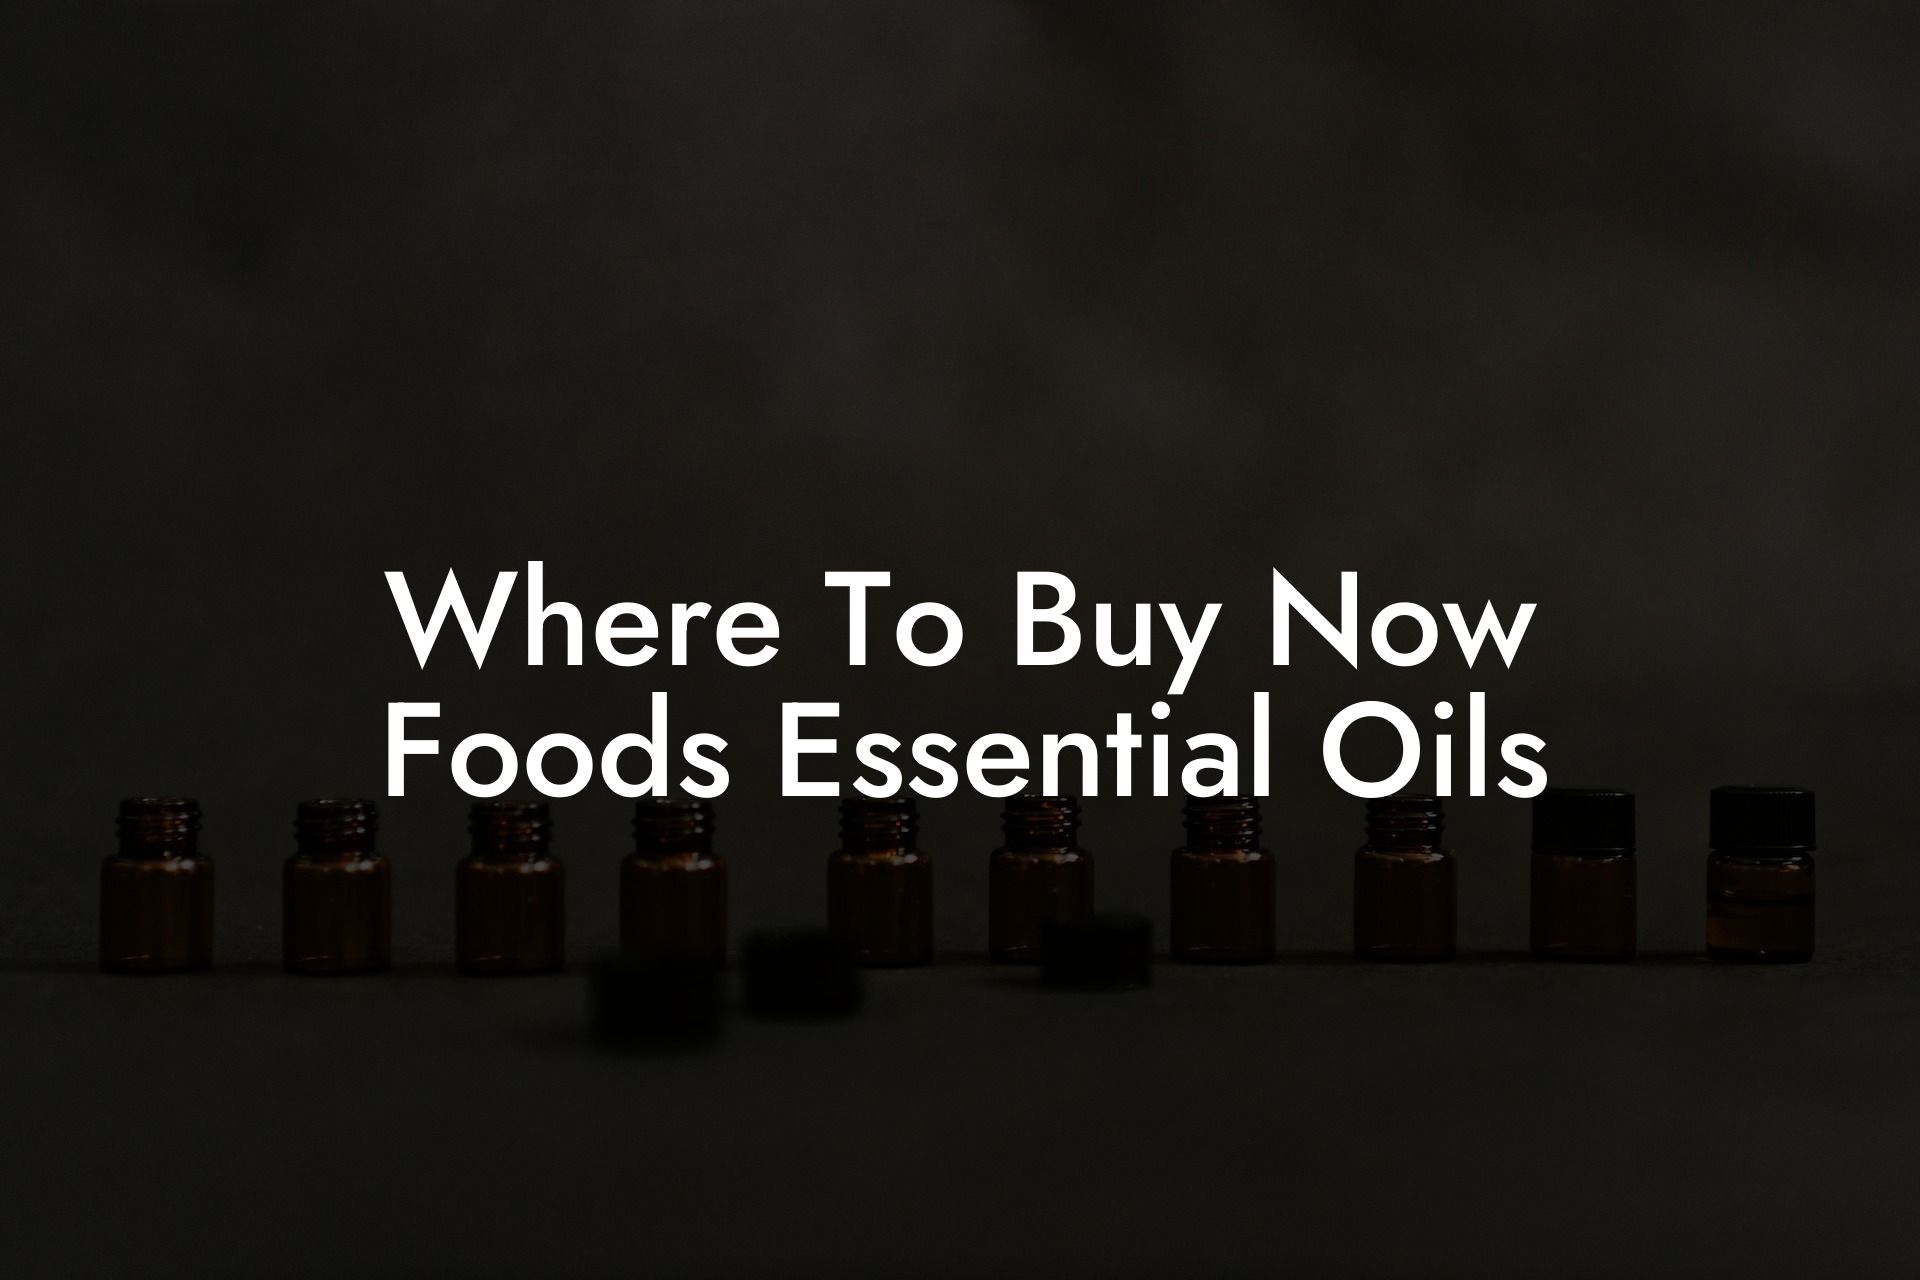 Where To Buy Now Foods Essential Oils